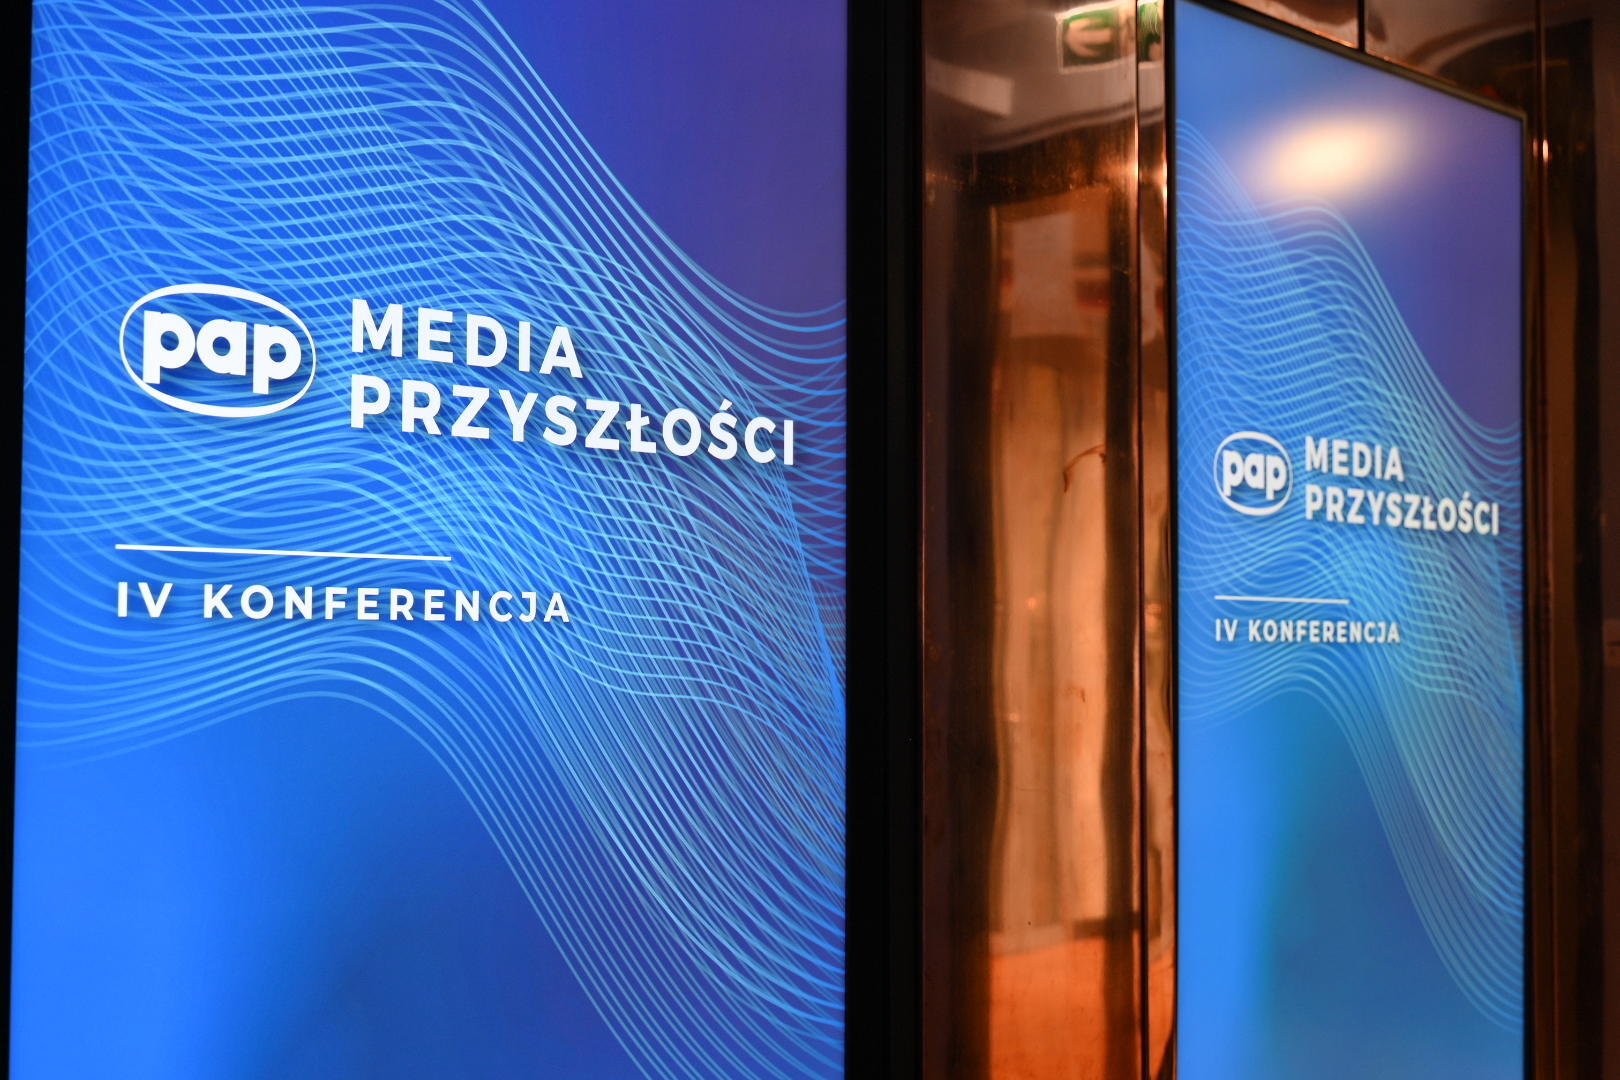 ATC attended the 4th Media of the Future International Conference